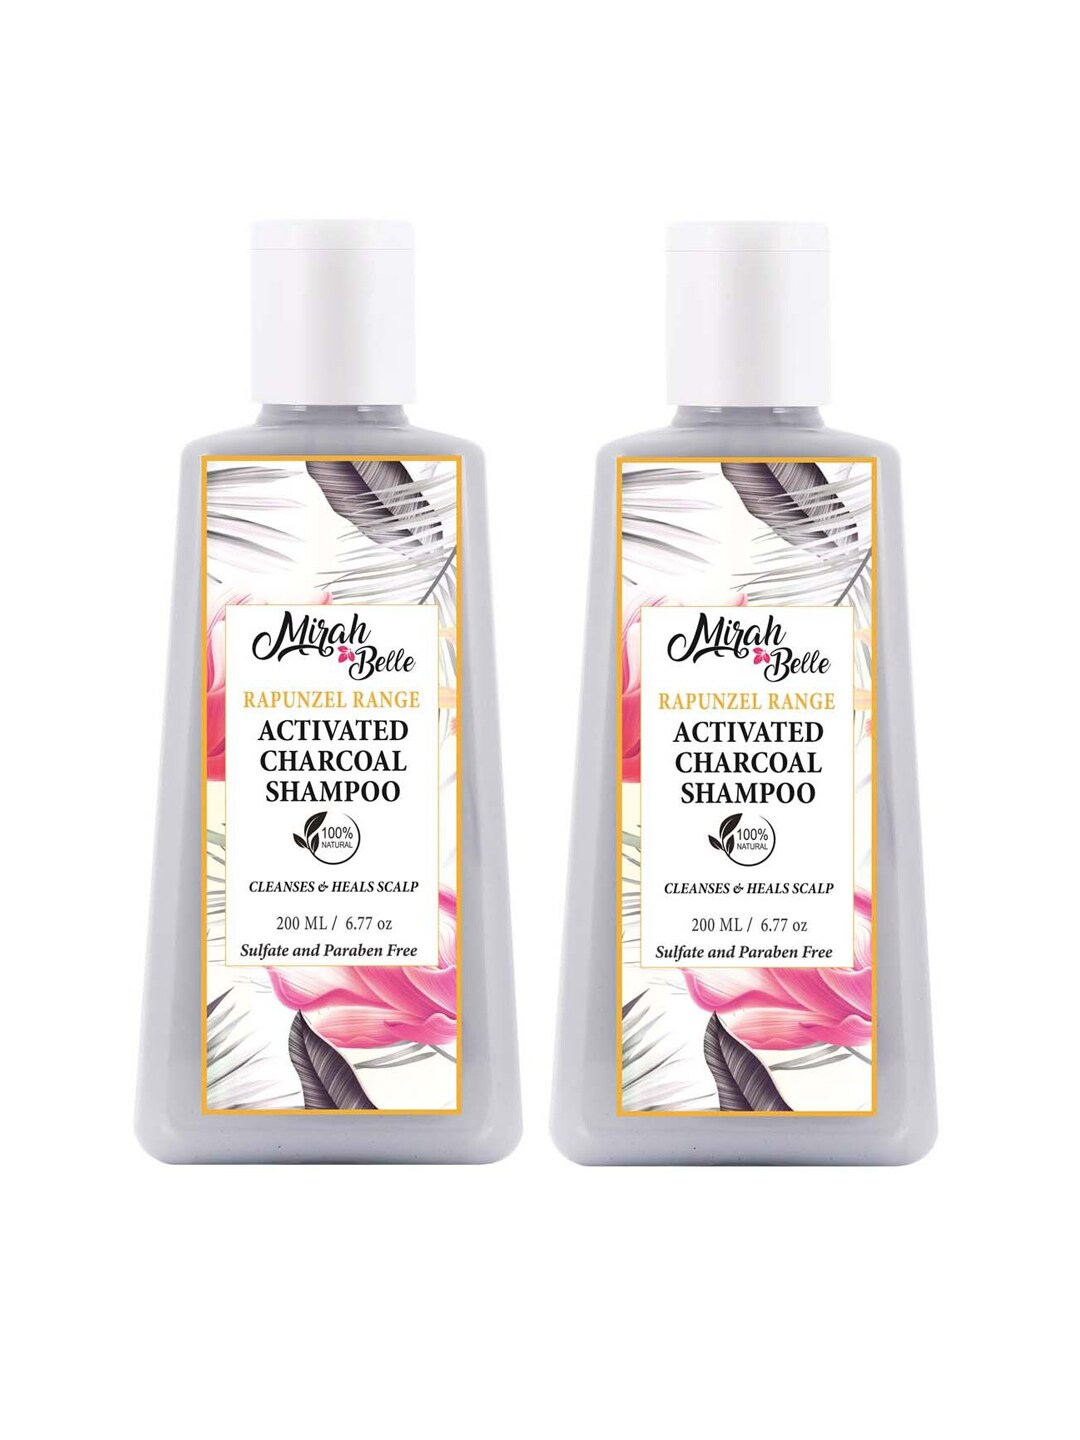 Mirah Belle Set of 2 Activated Charcoal Shampoo 400 ml Price in India